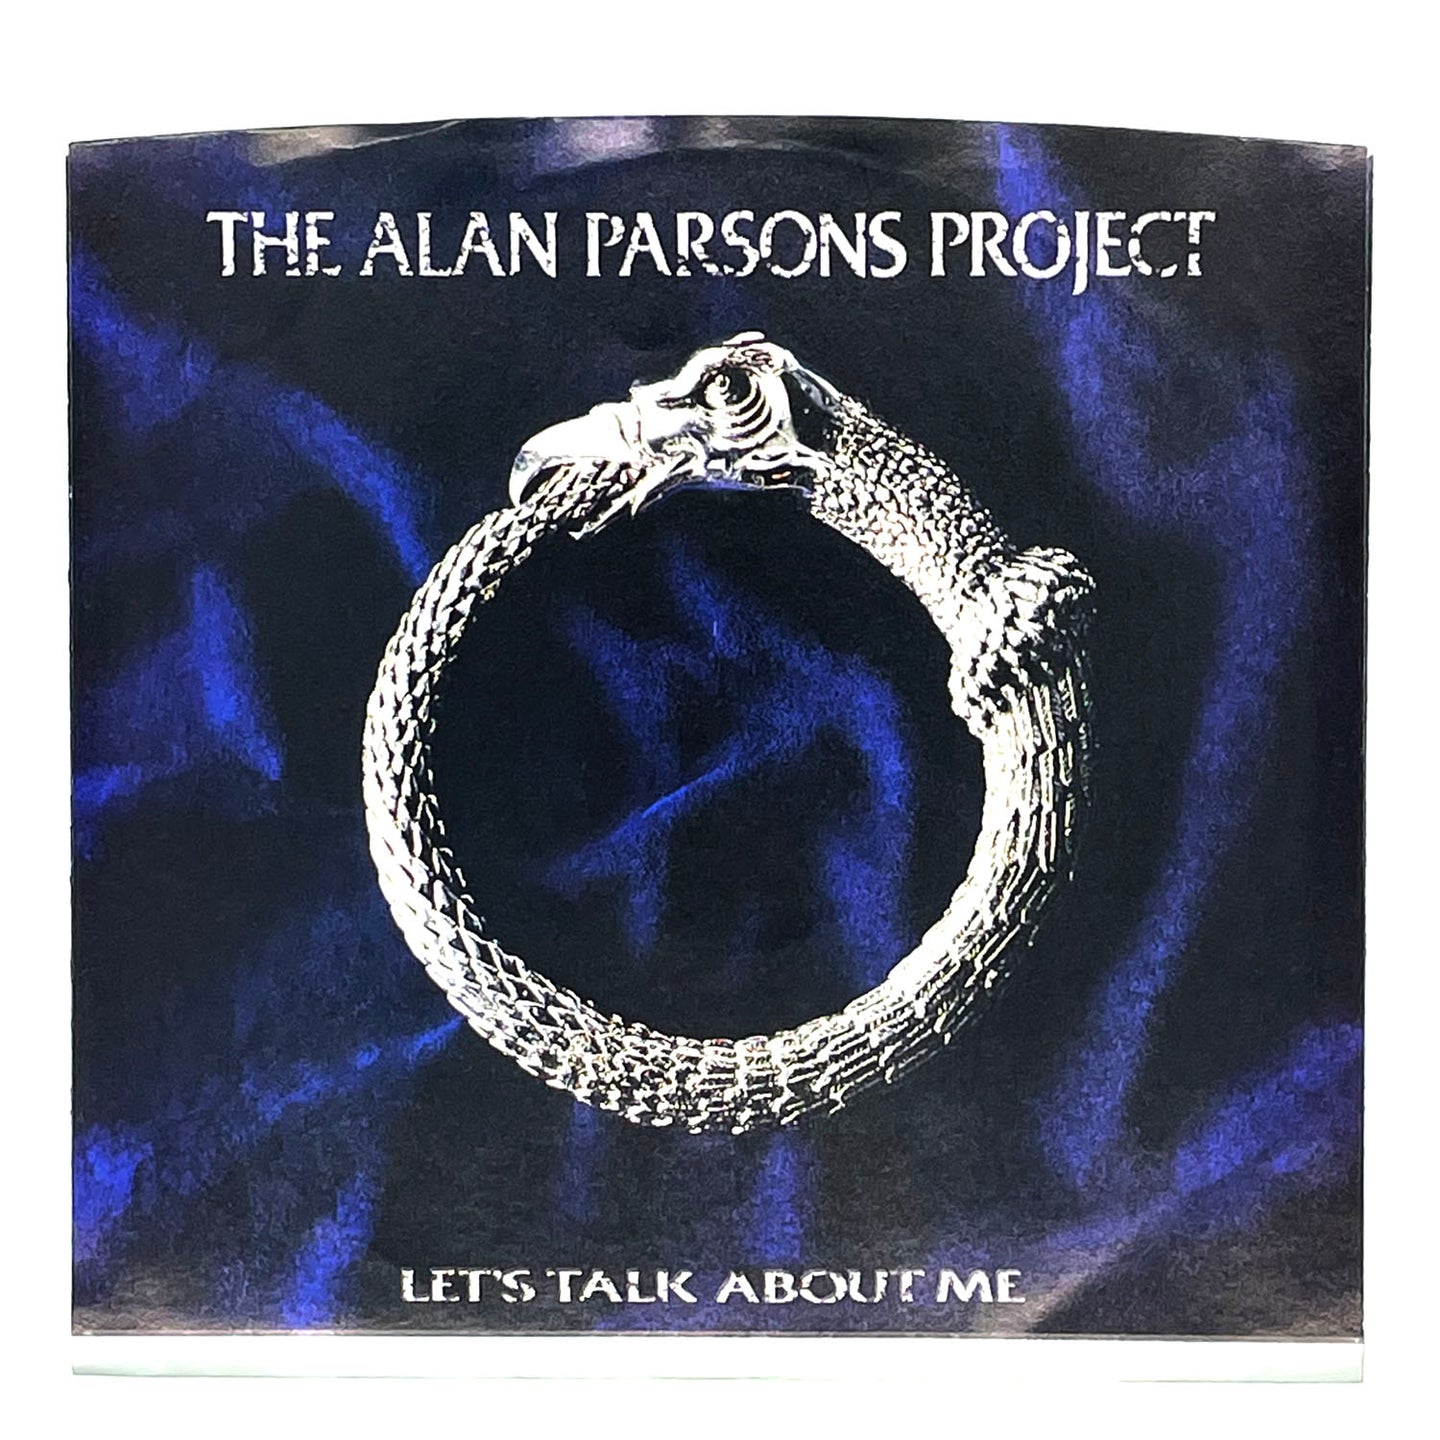 Alan Parsons Project, The : LET'S TALK ABOUT ME/ HAWKEYE